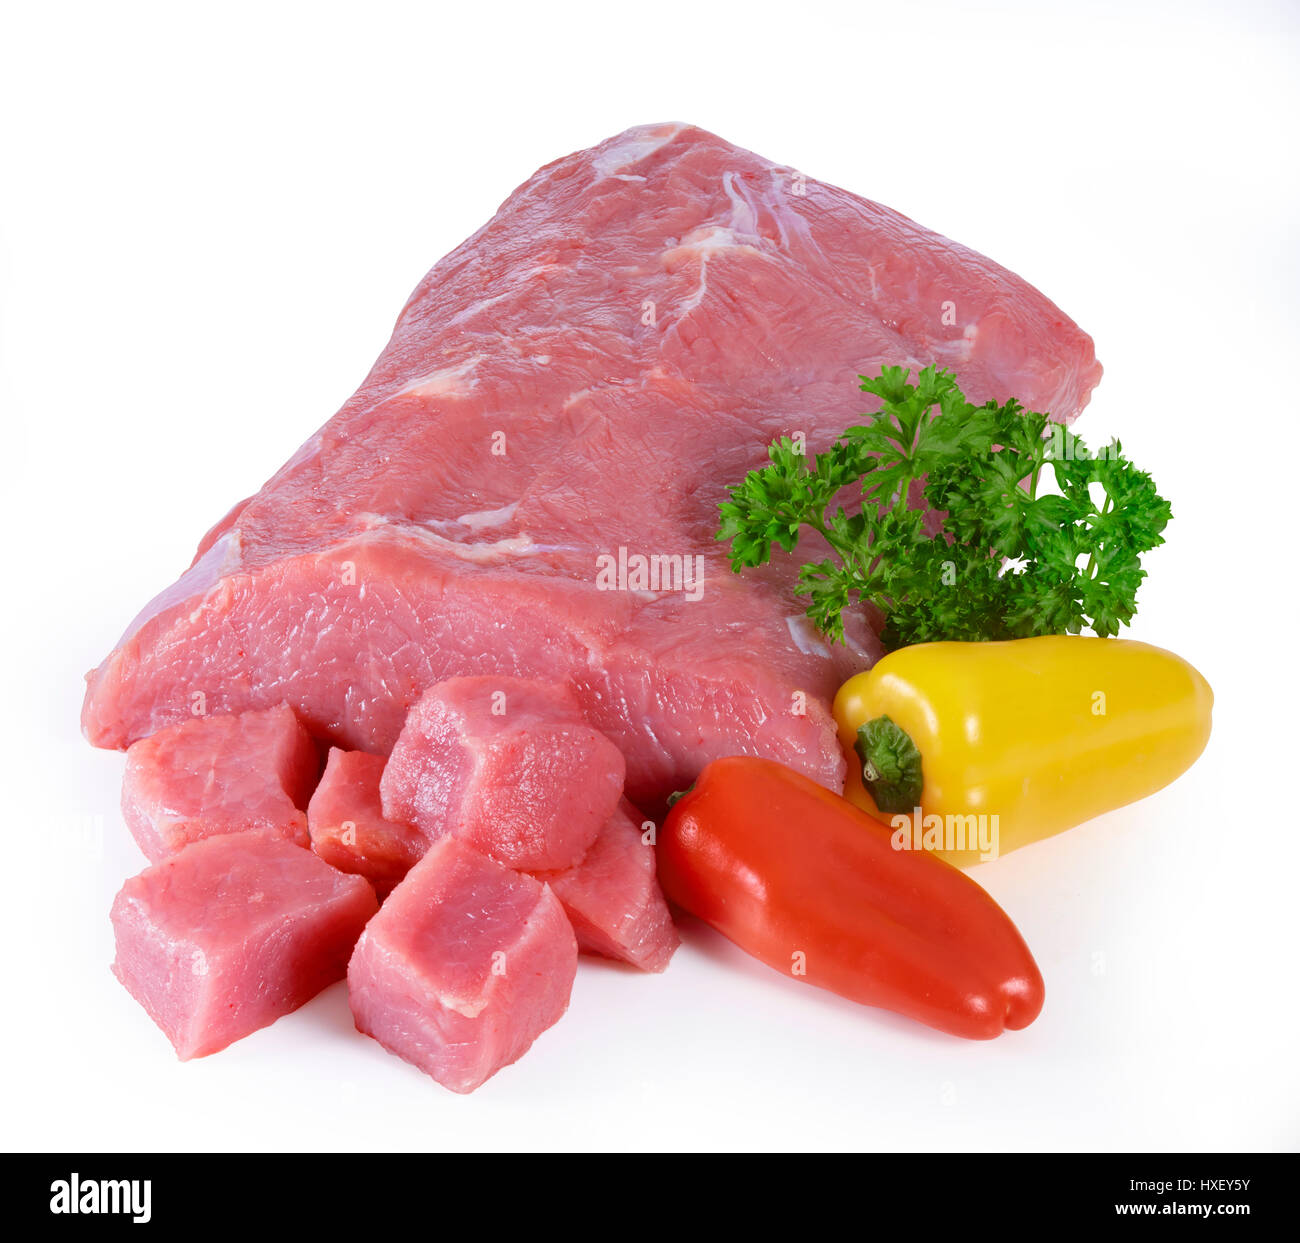 Raw milk veal, beef, peppers (Capsicum) and parsley (Petroselinum crispum) as decoration Stock Photo